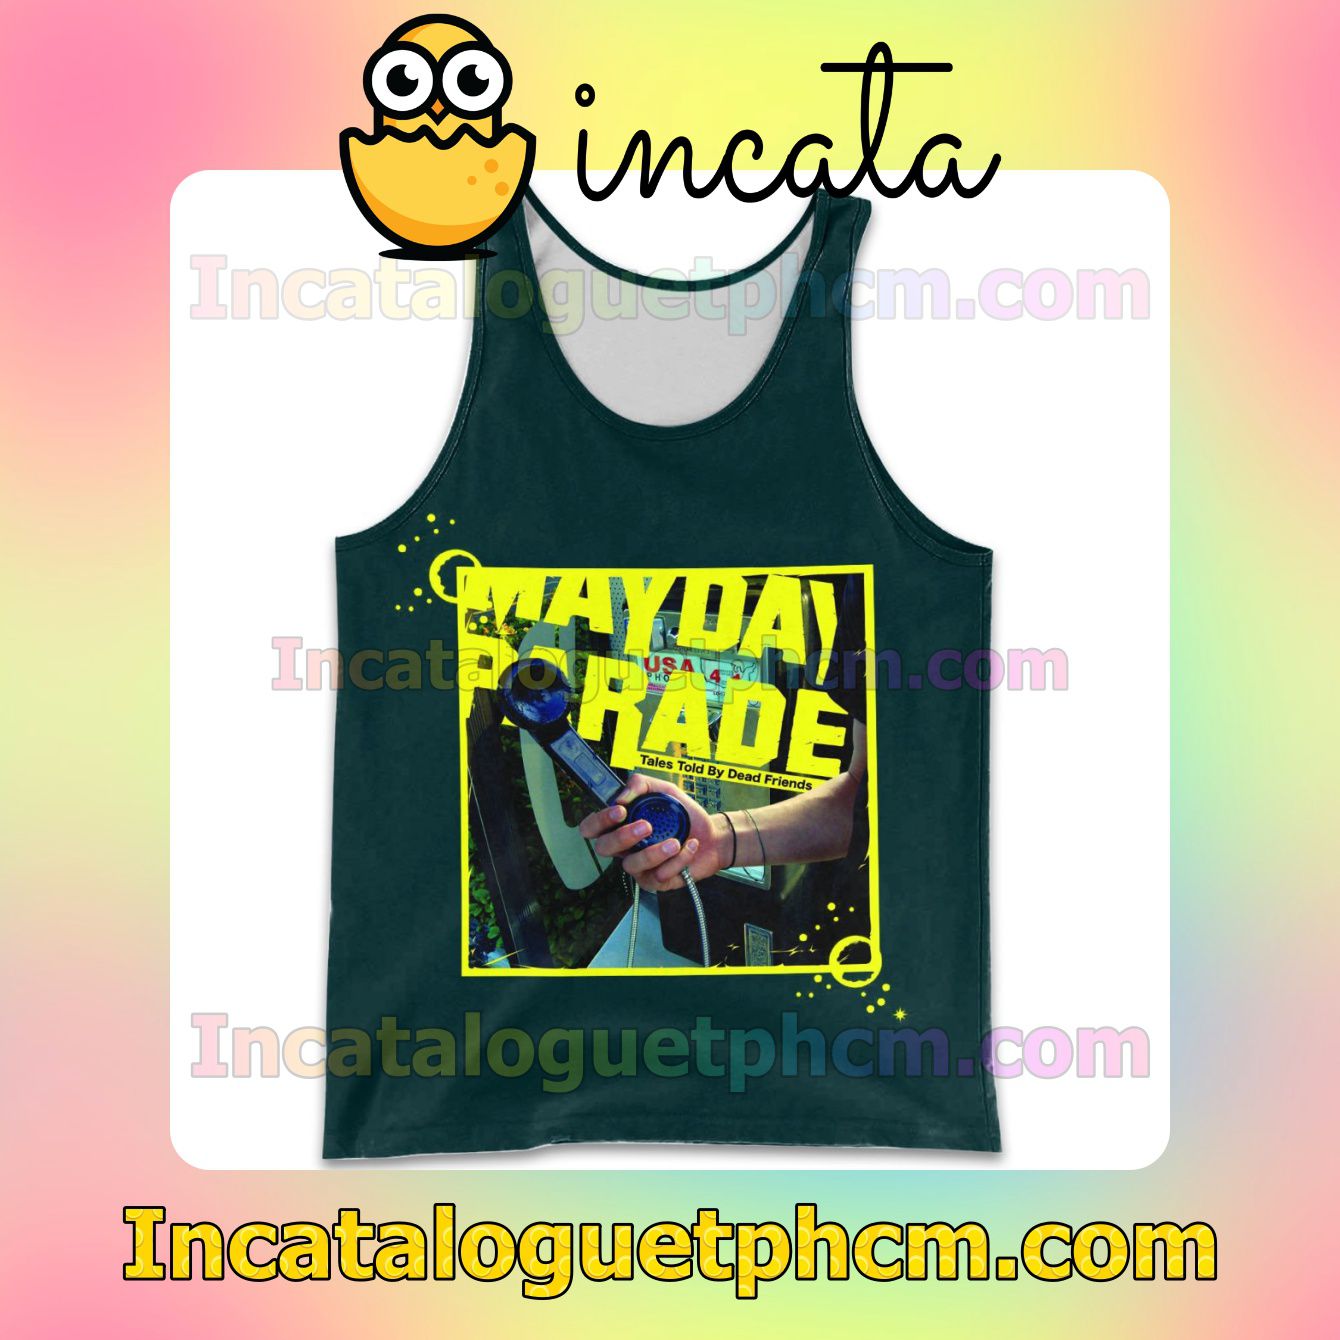 Amazing Personalized Mayday Parade Tales Told By Dead Friends Album Cover Workout Tank Top